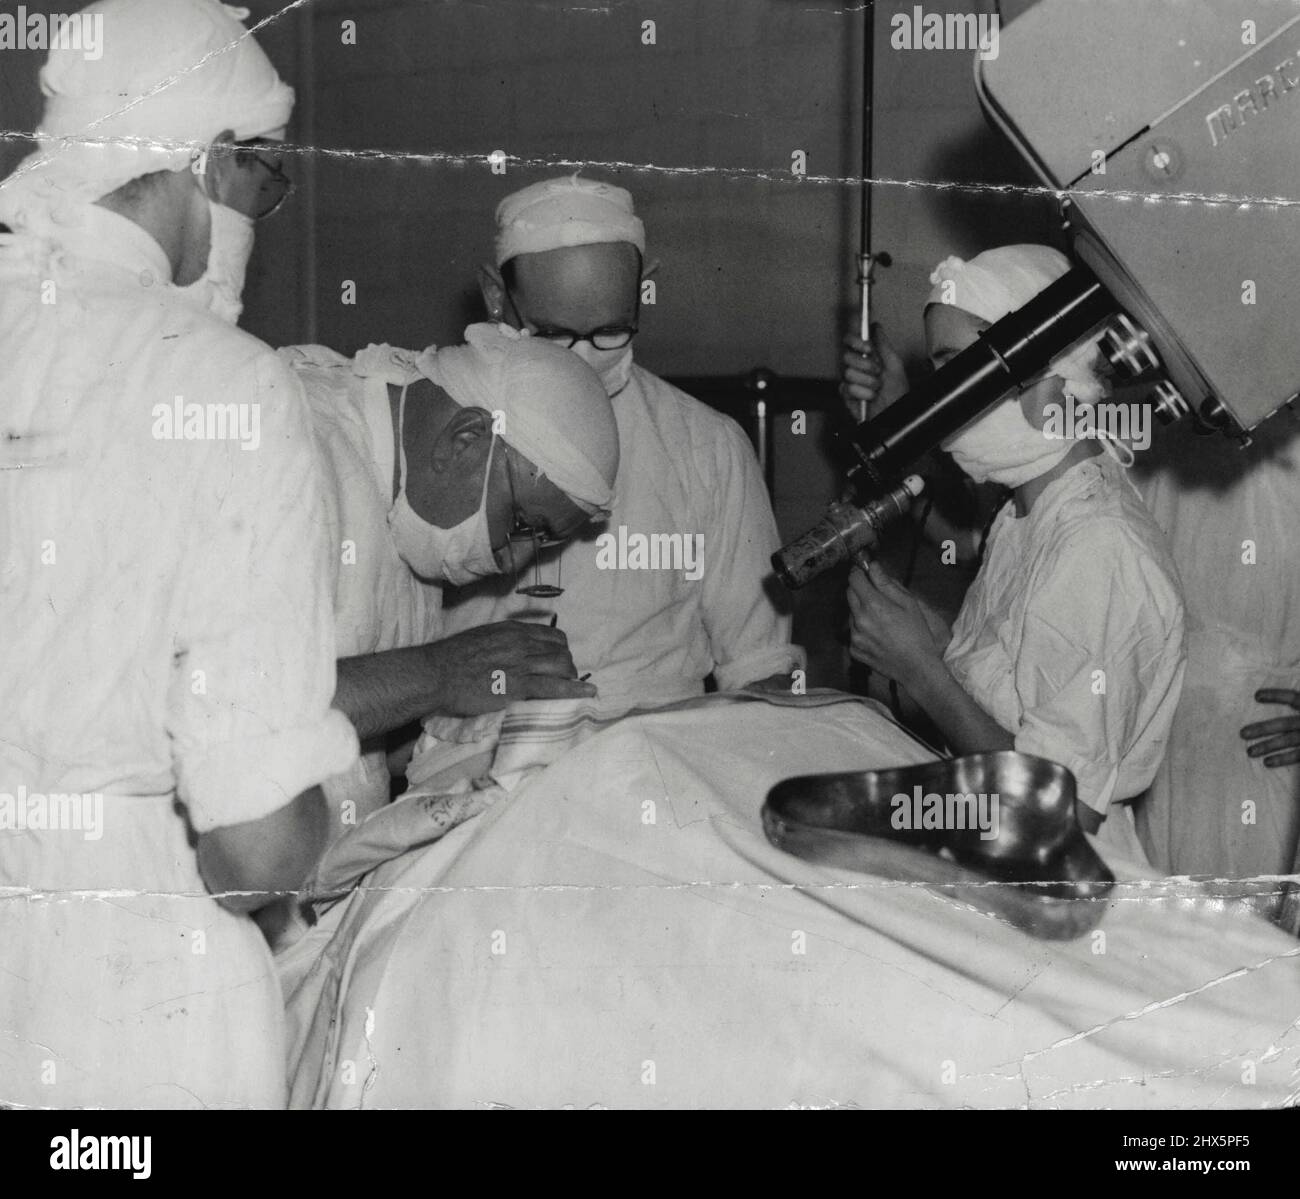 Magnifying Spectacles. The operation was extremely delicate and the surgeon wore this set of magnifying spectacles. January 8, 1950. Stock Photo